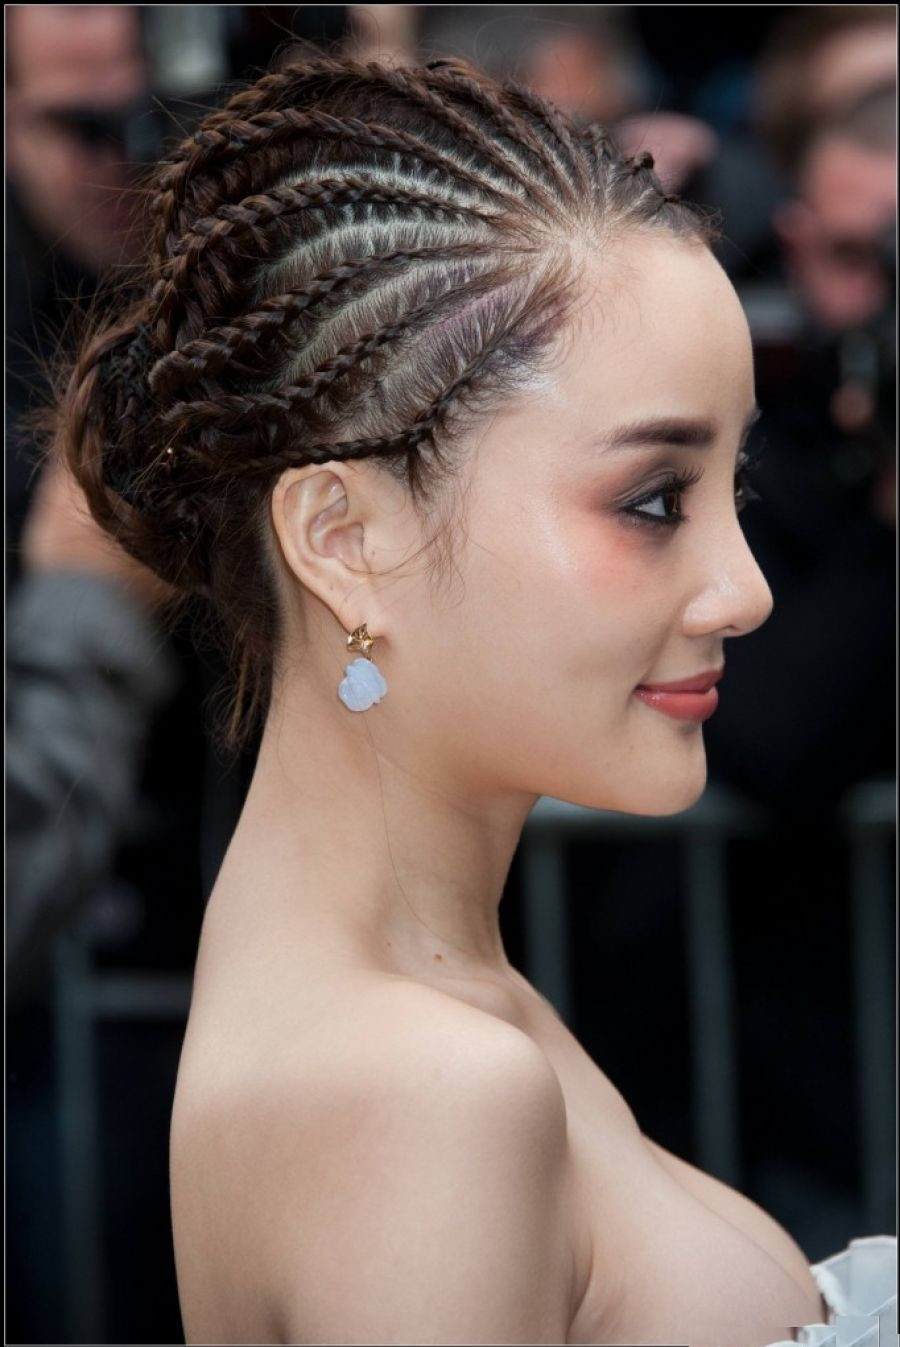 Cornrow Braid Hairstyles
 5 Excellent Cornrow Hairstyles for Fashion Personalities